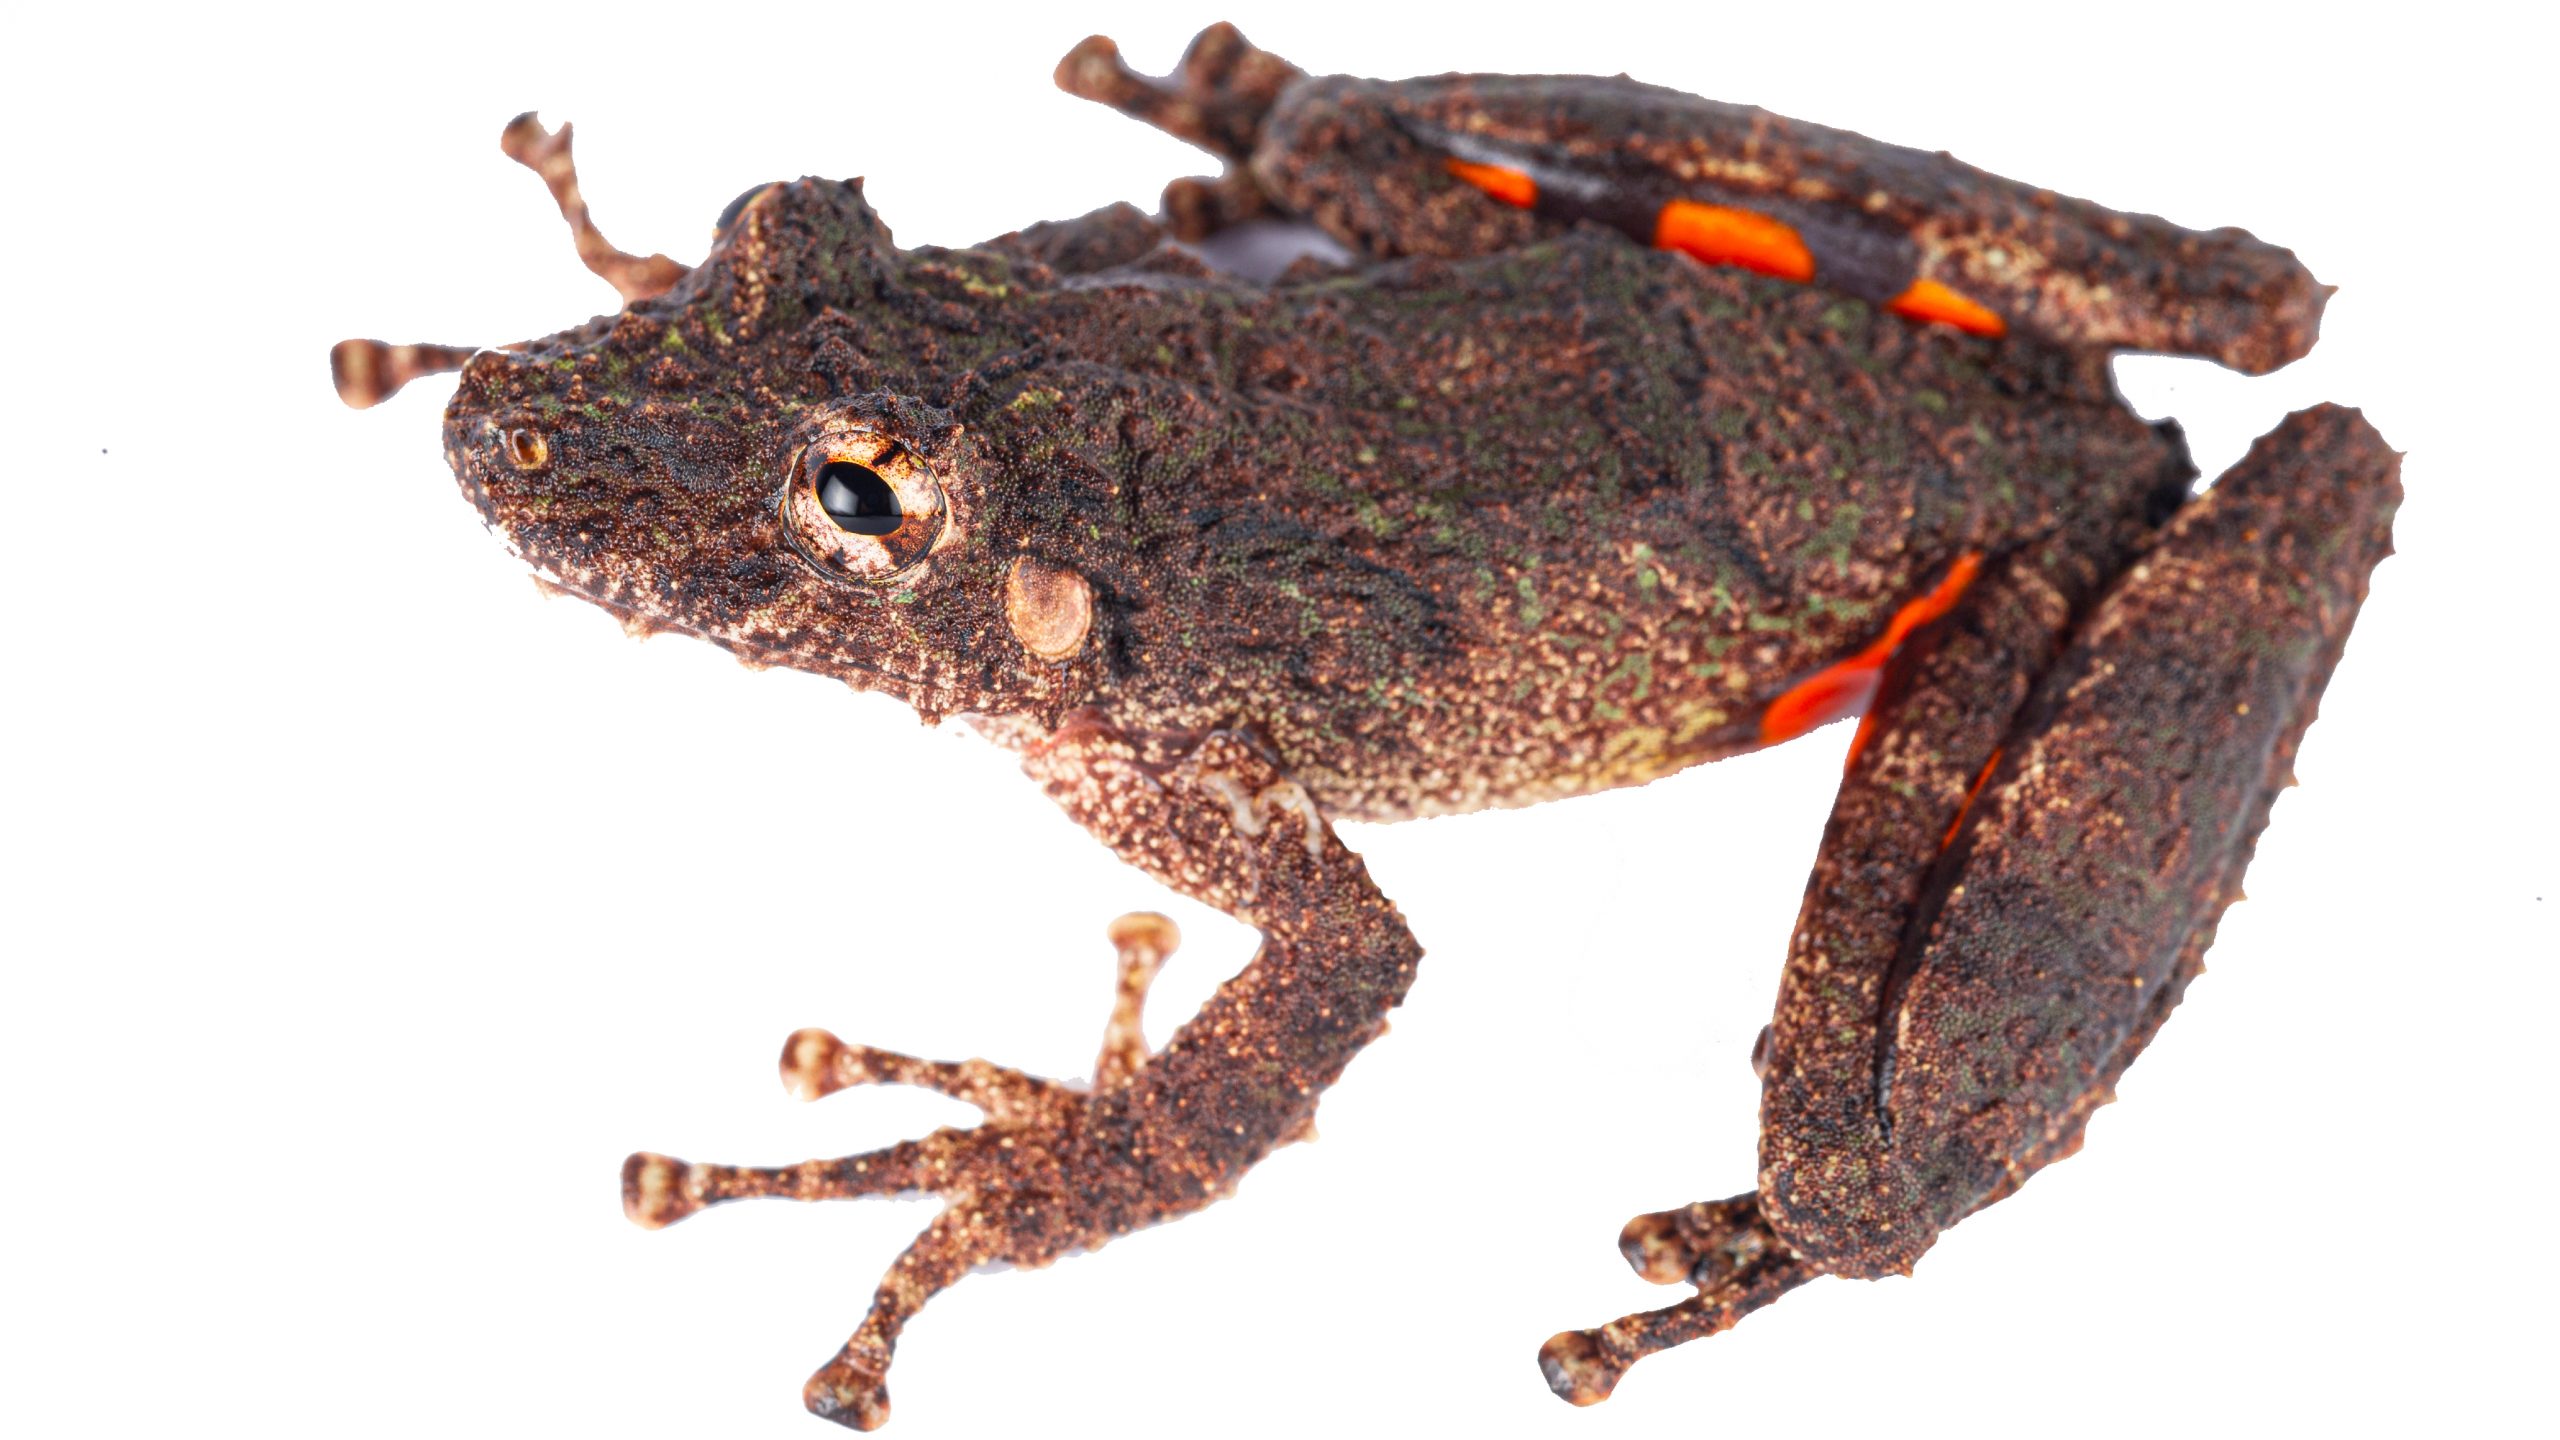 A new “groins of fire” frog, from the Peruvian Amazon